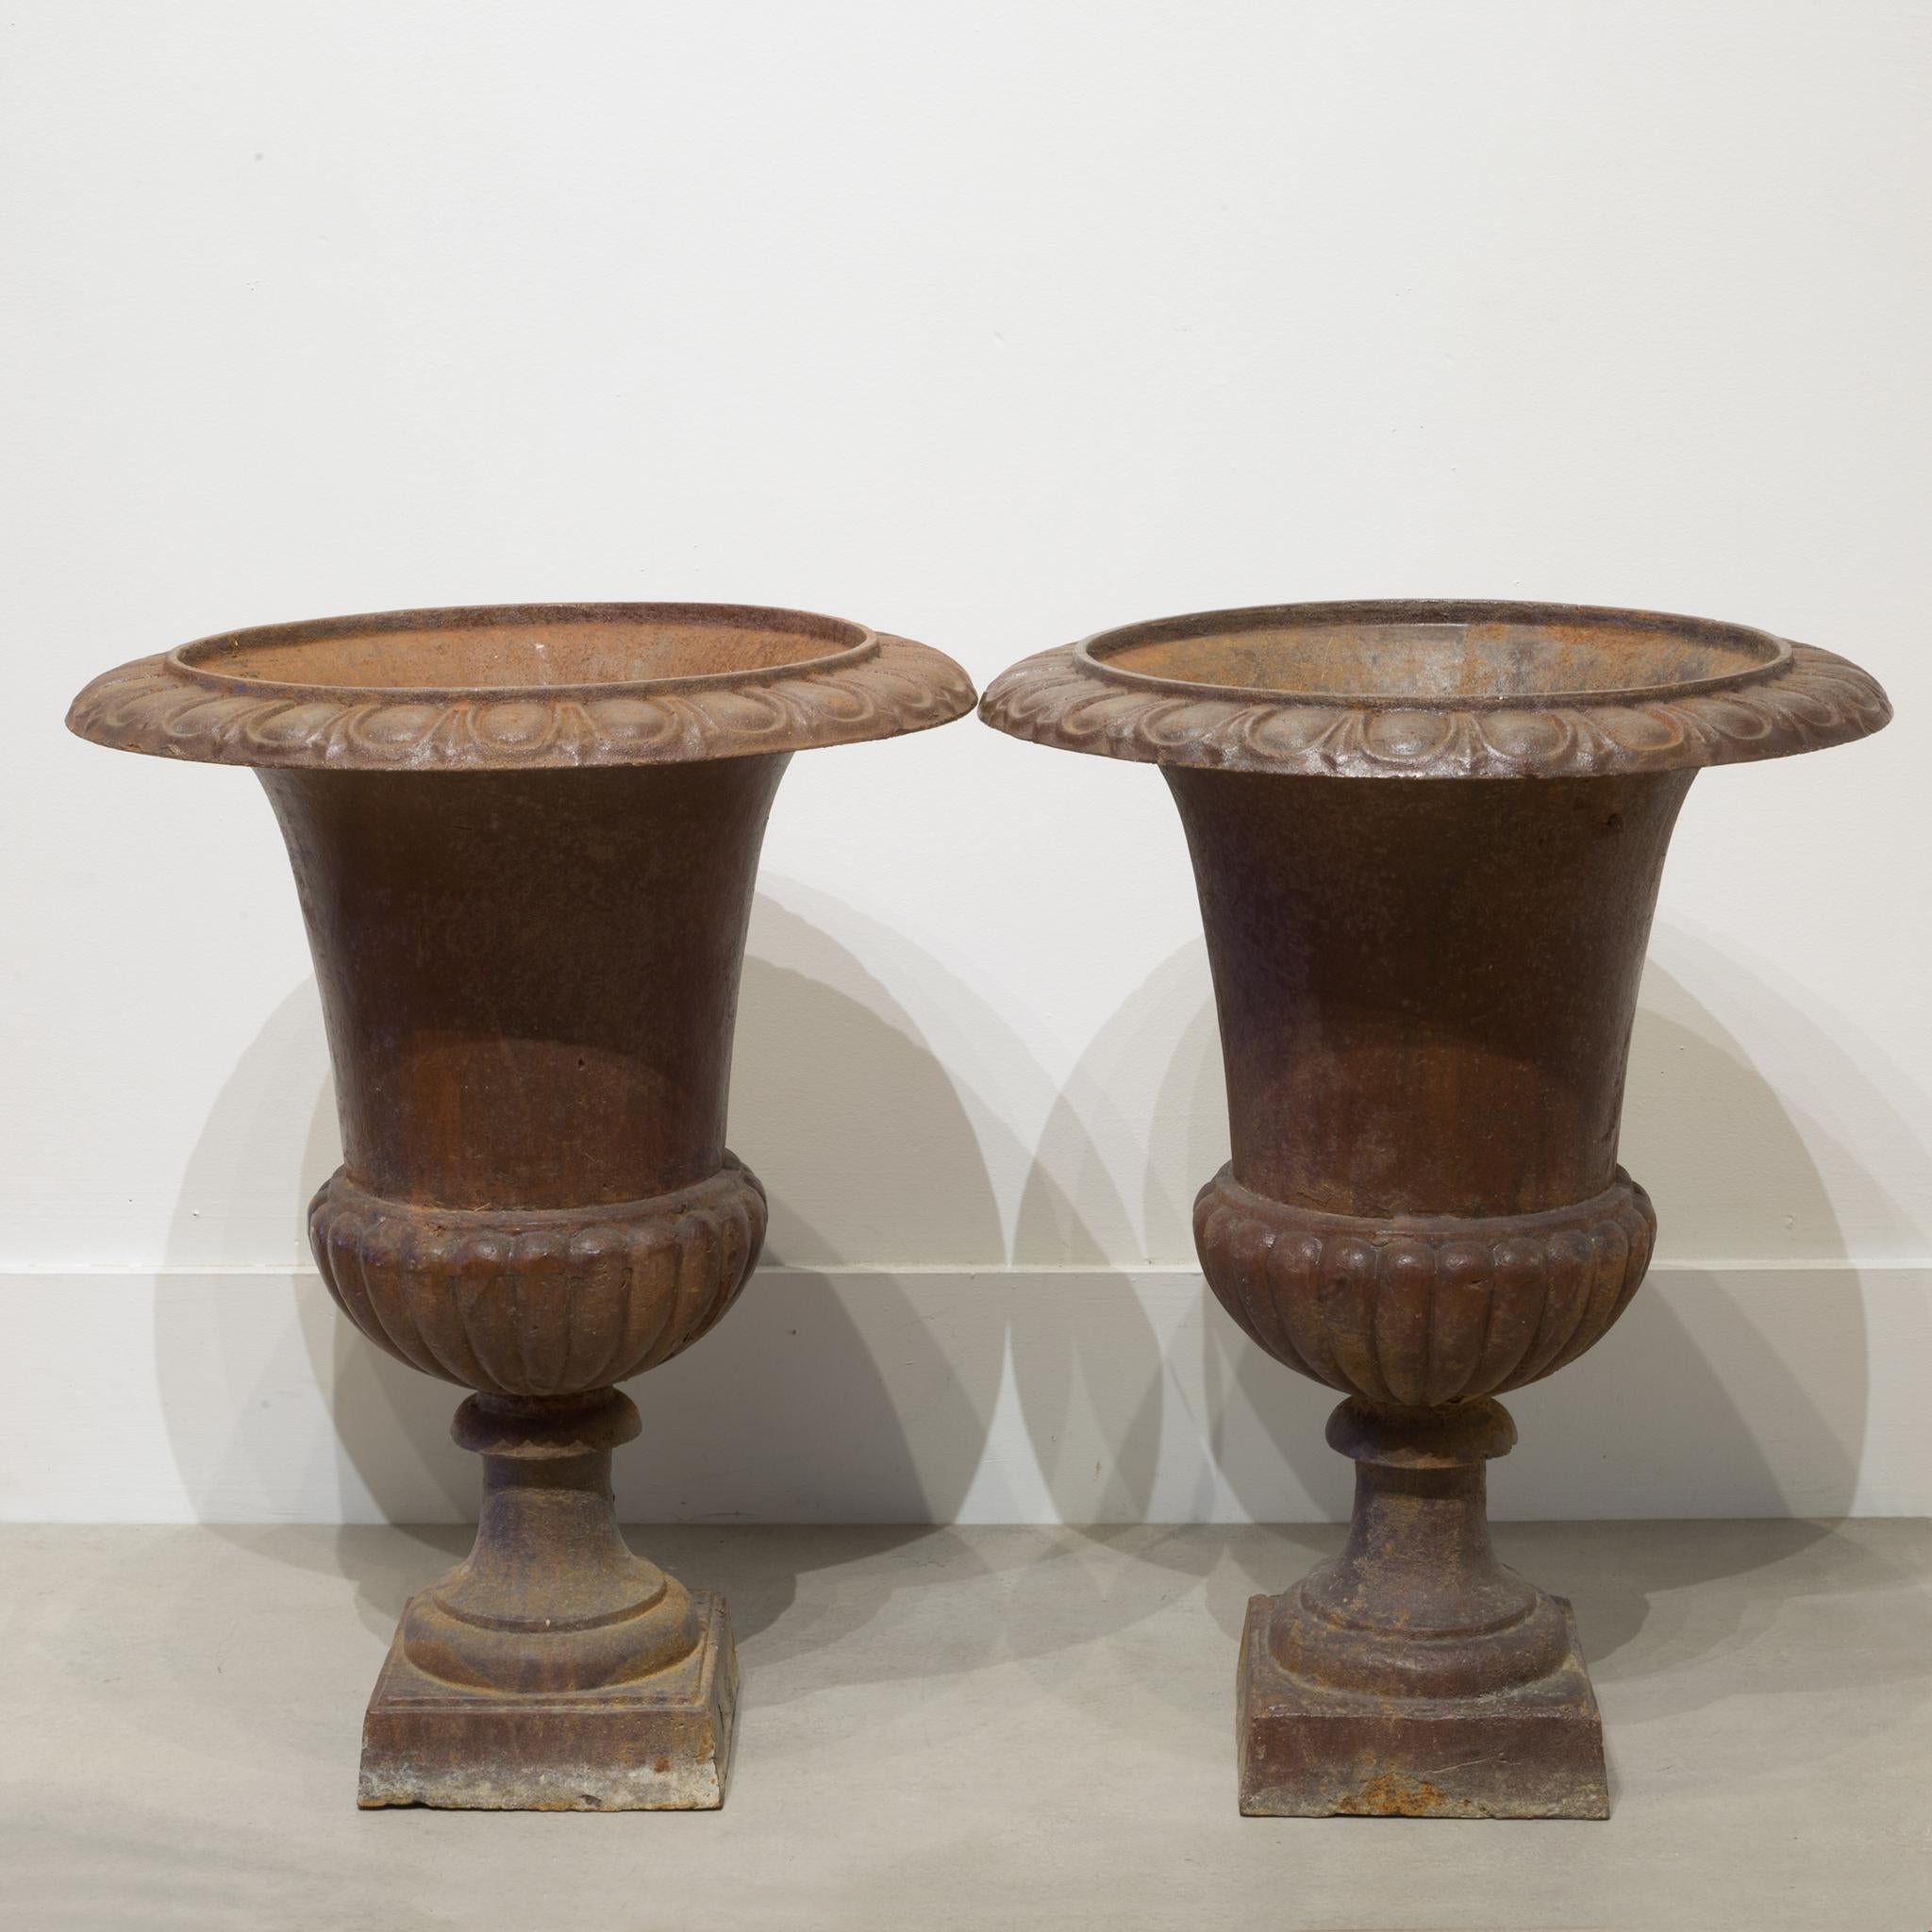 American Pair of Early 20th Century Cast Iron Urns